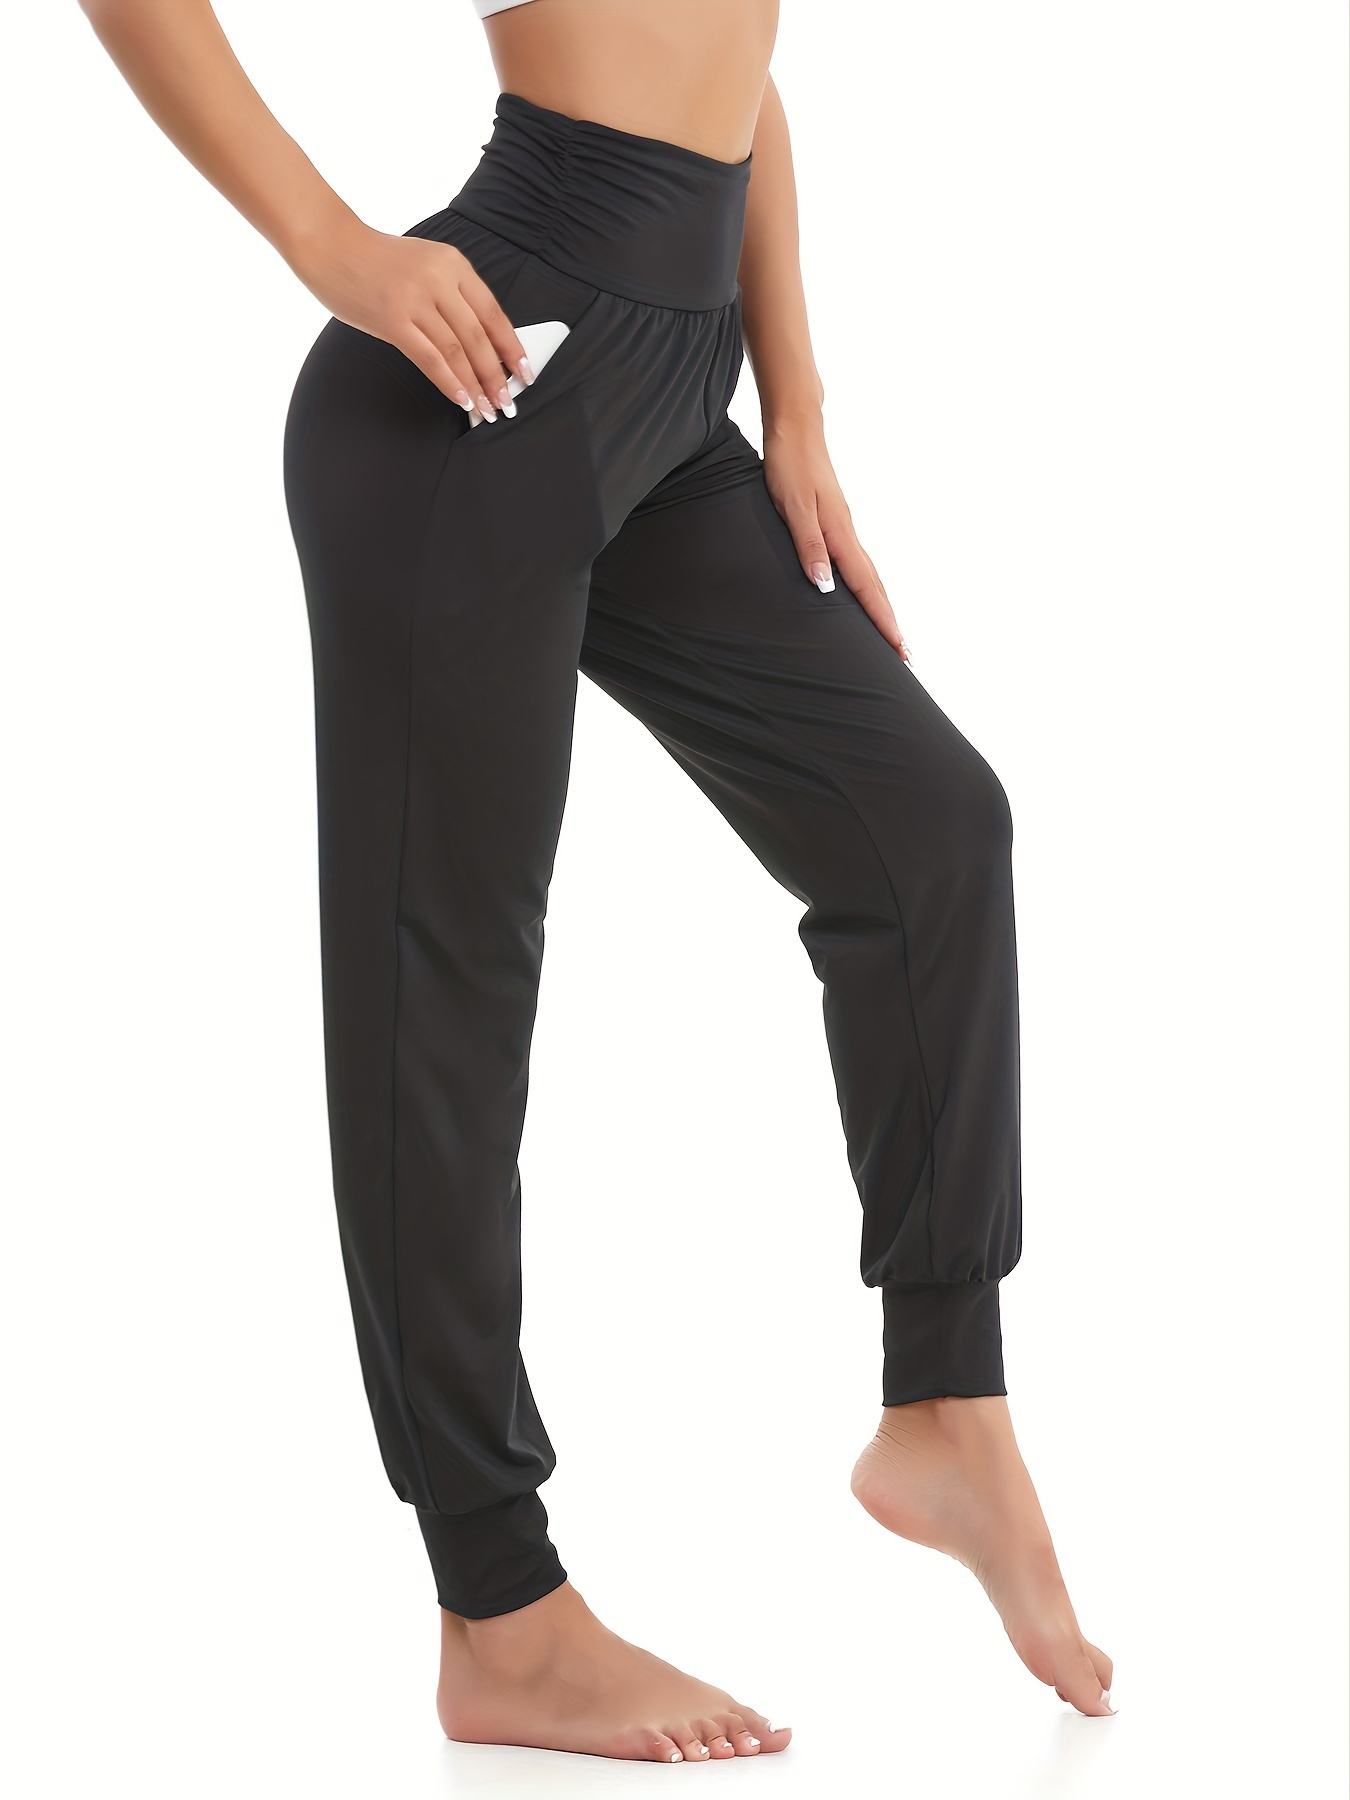 Women's Yoga Joggers with Pockets Workout Running Yoga Pants